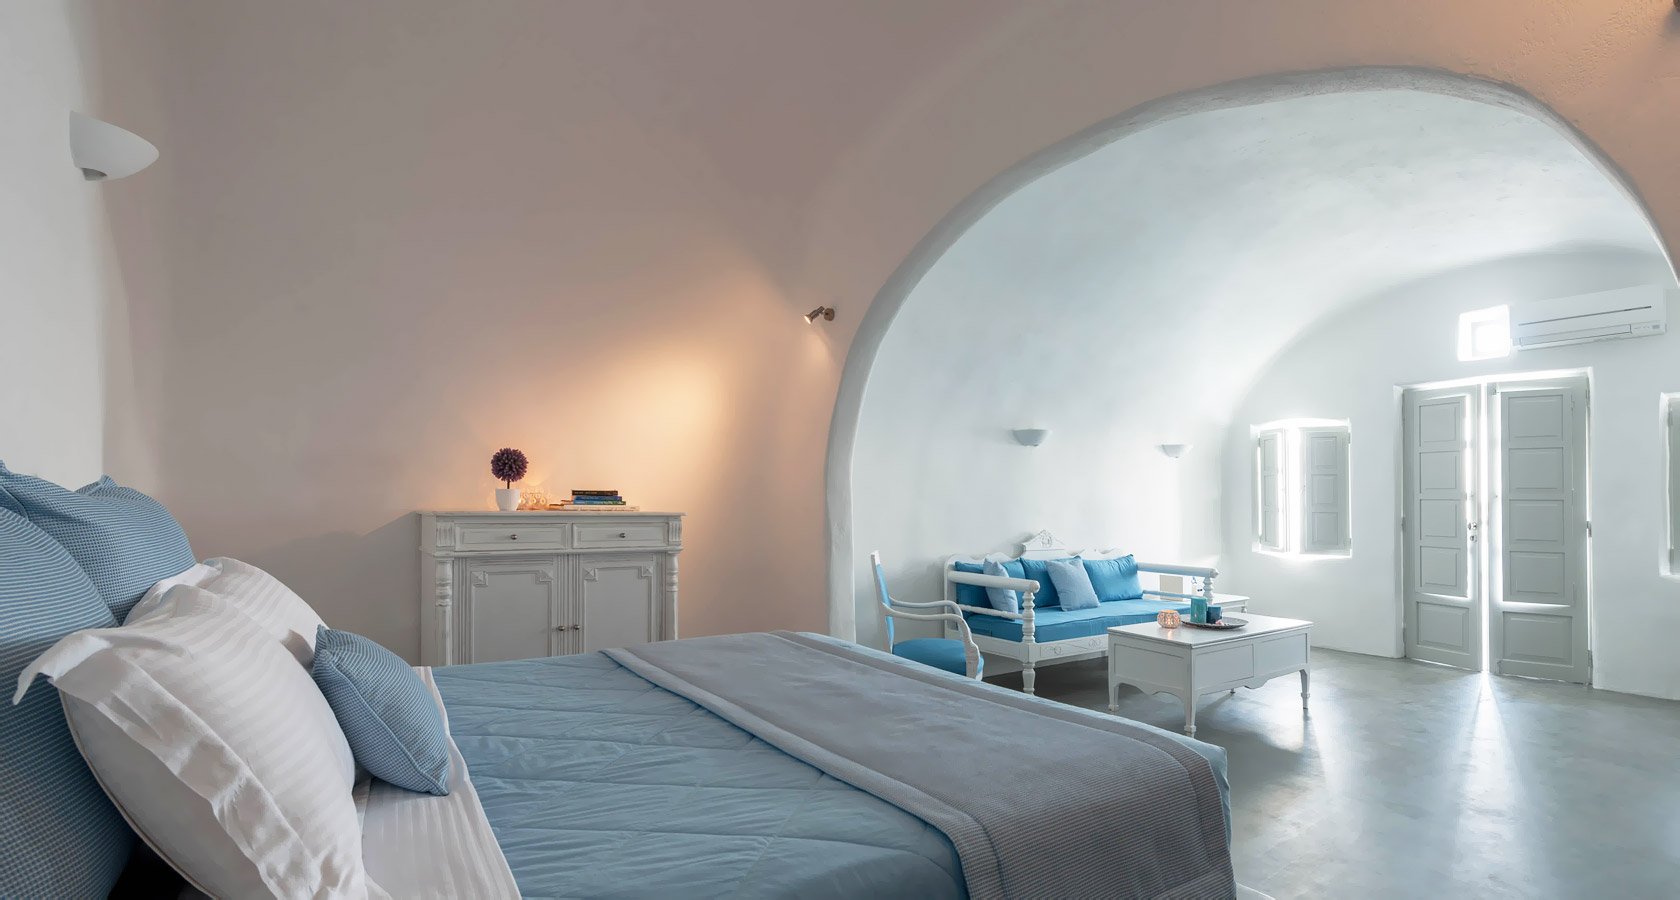 Overview of the Thirea superior suite in Oia Santorini